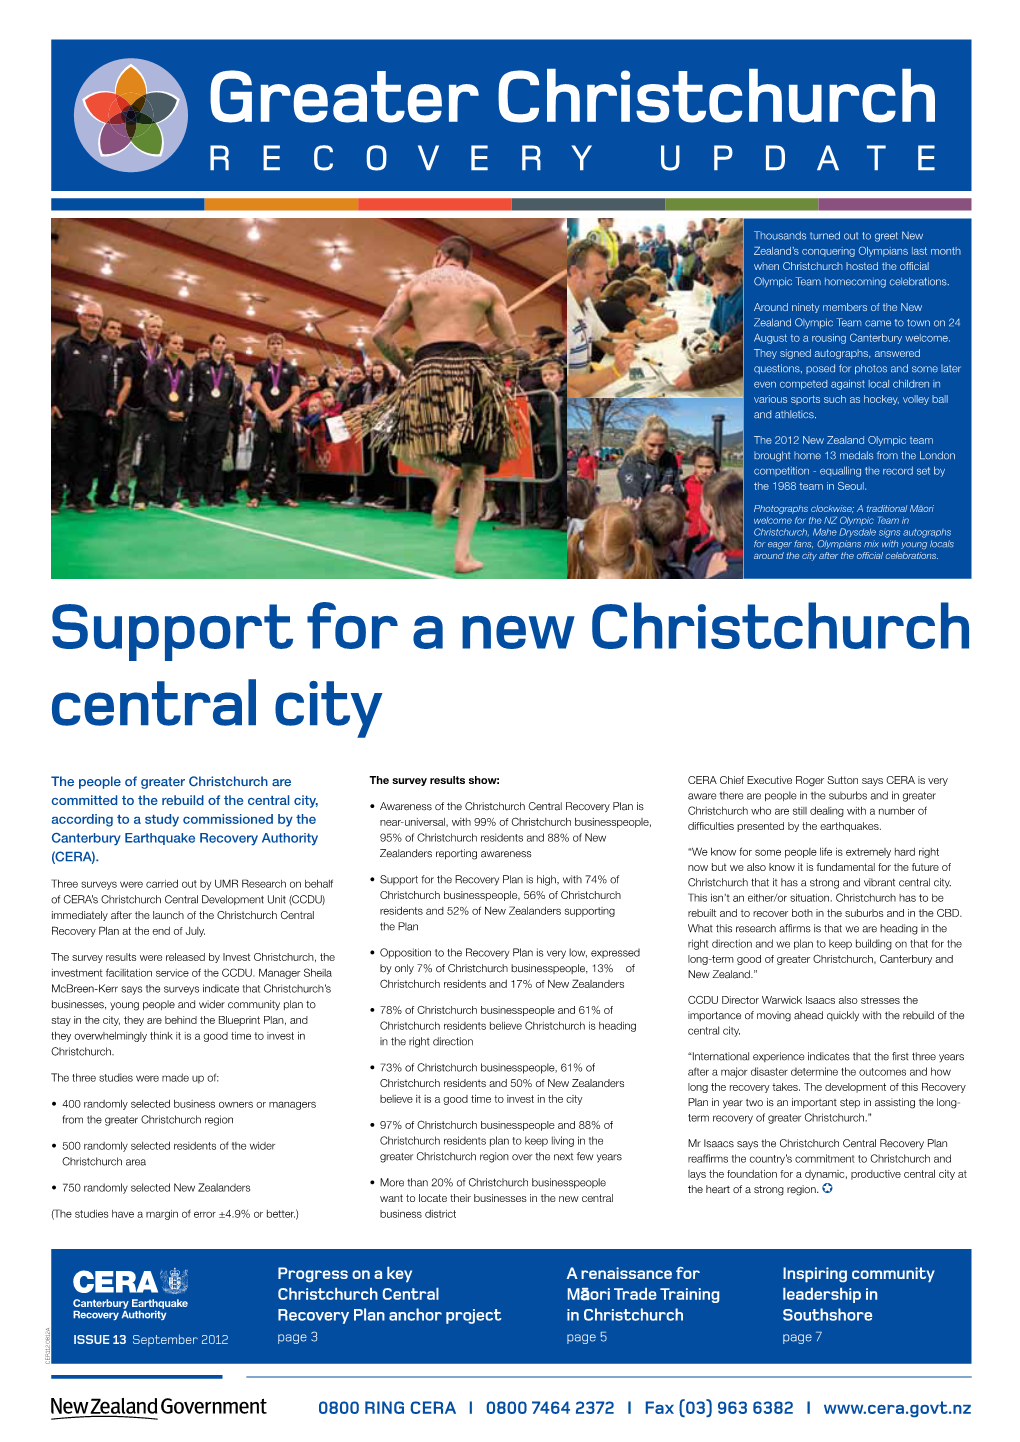 Greater Christchurch RECOVERY UPDATE